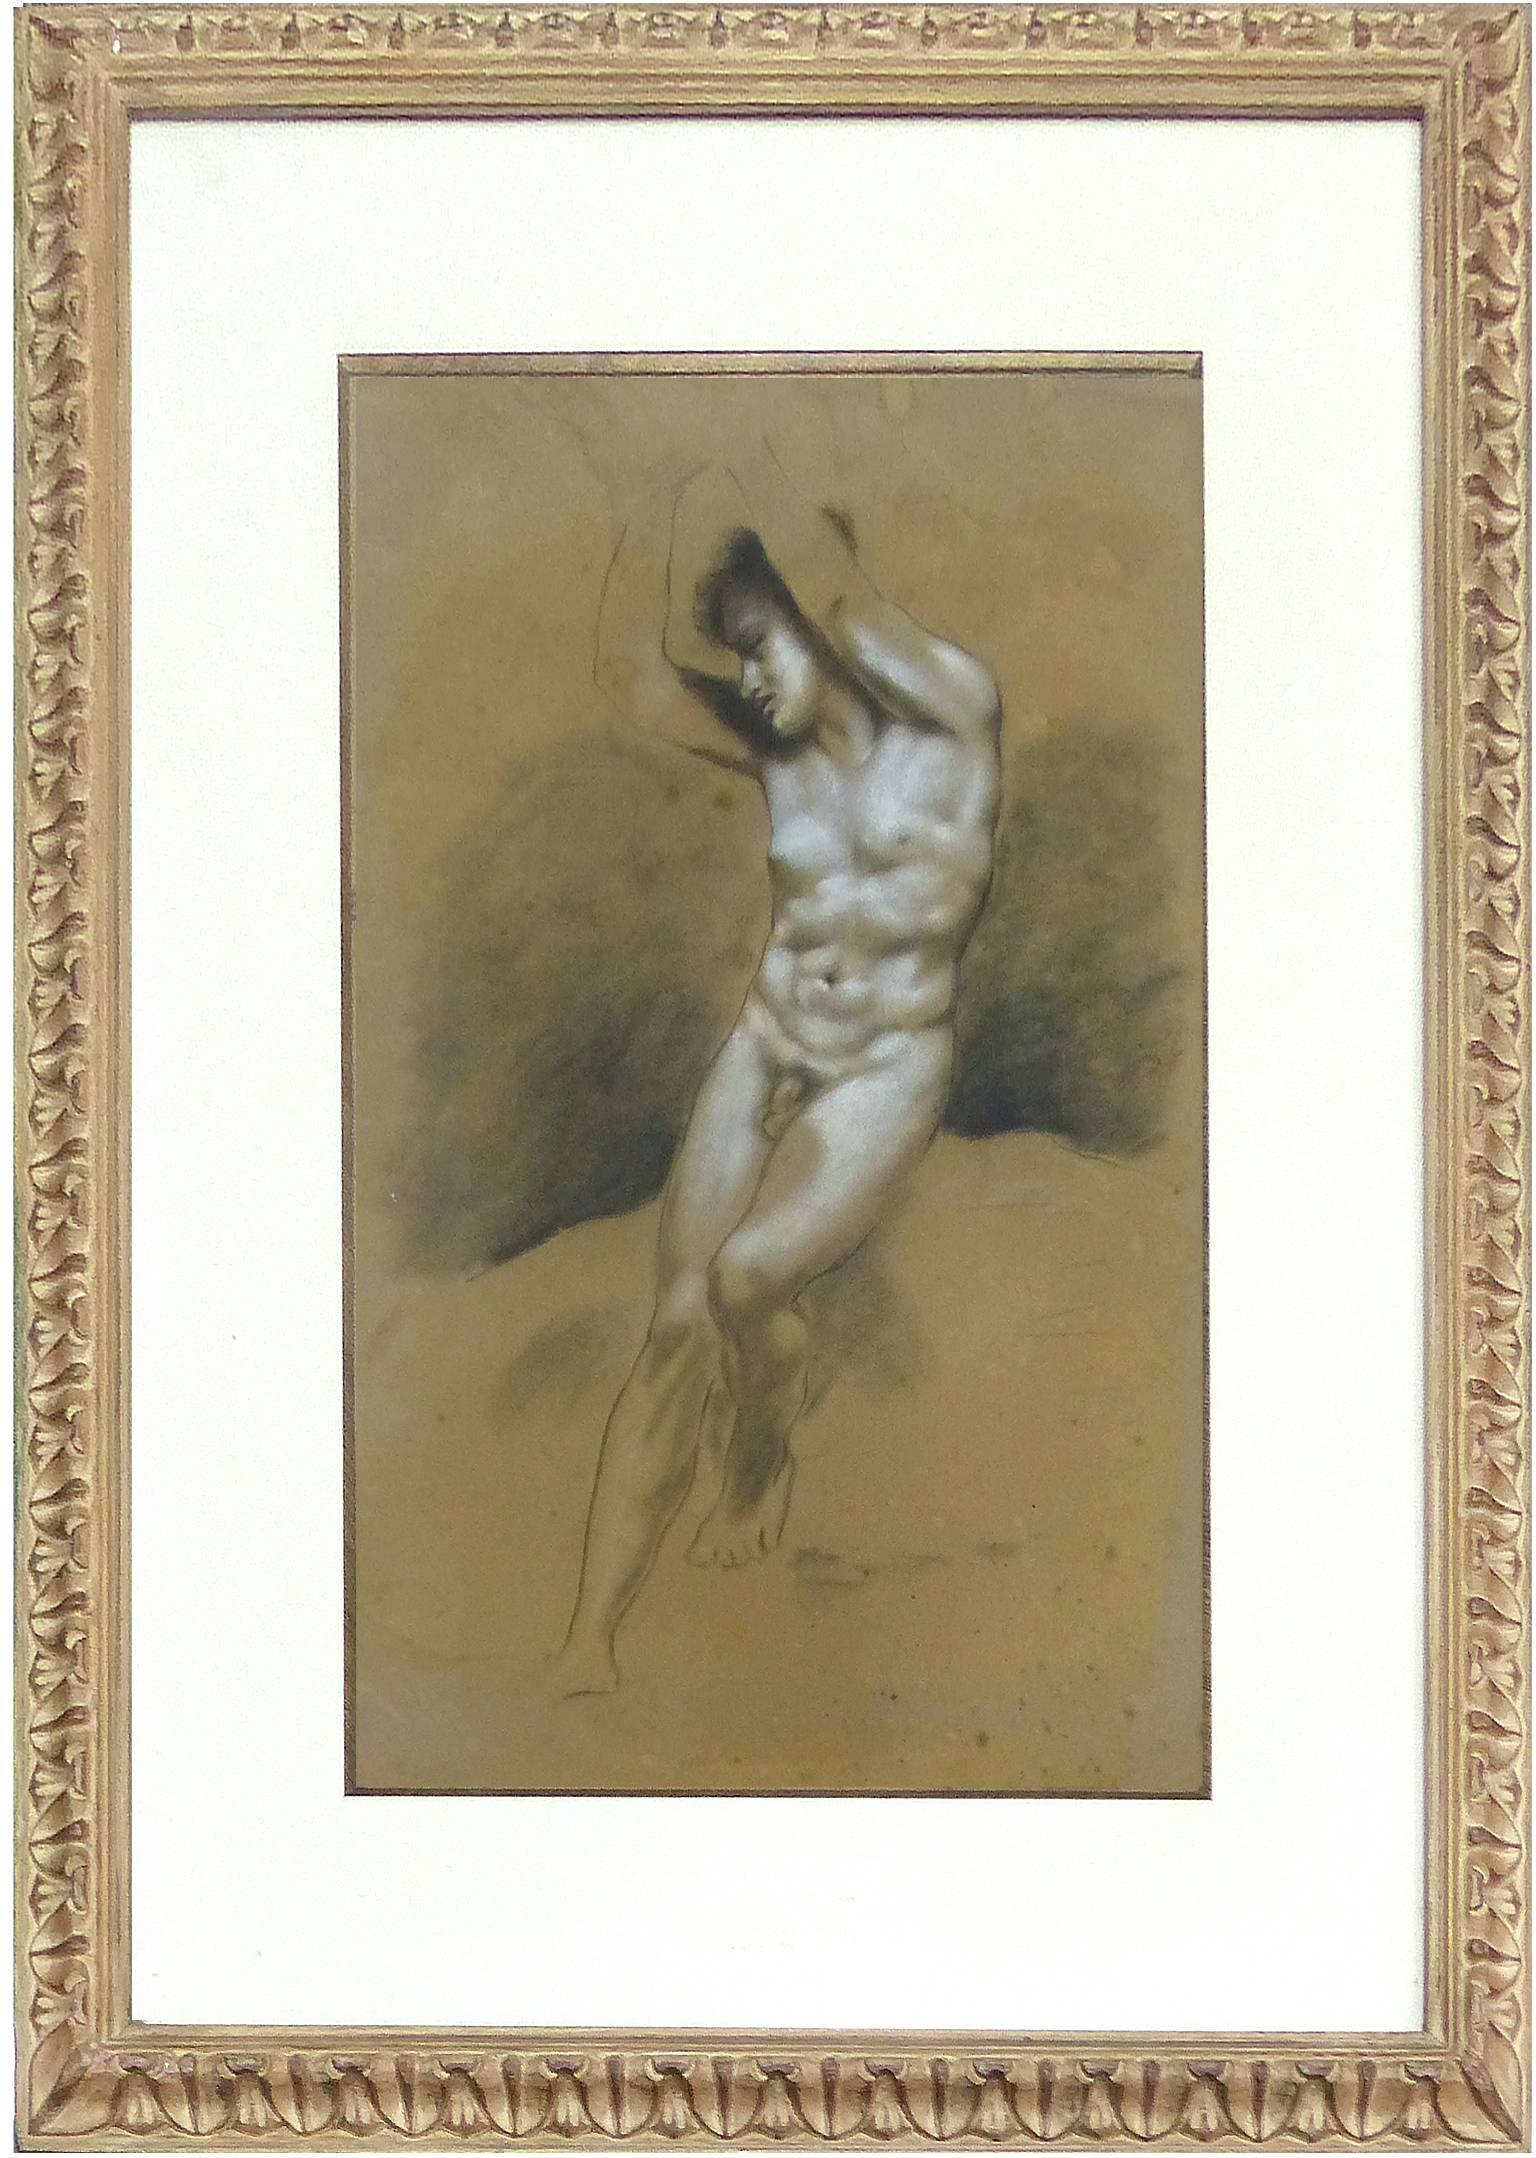 Pair of Drawings of Male Nude Figures attributed to Francois Boucher, circa 1750

This is a pair of charcoal and white pastel drawings of male nude figures. The works are well done and elegantly presented in lightly gilt carved egg and dart wood